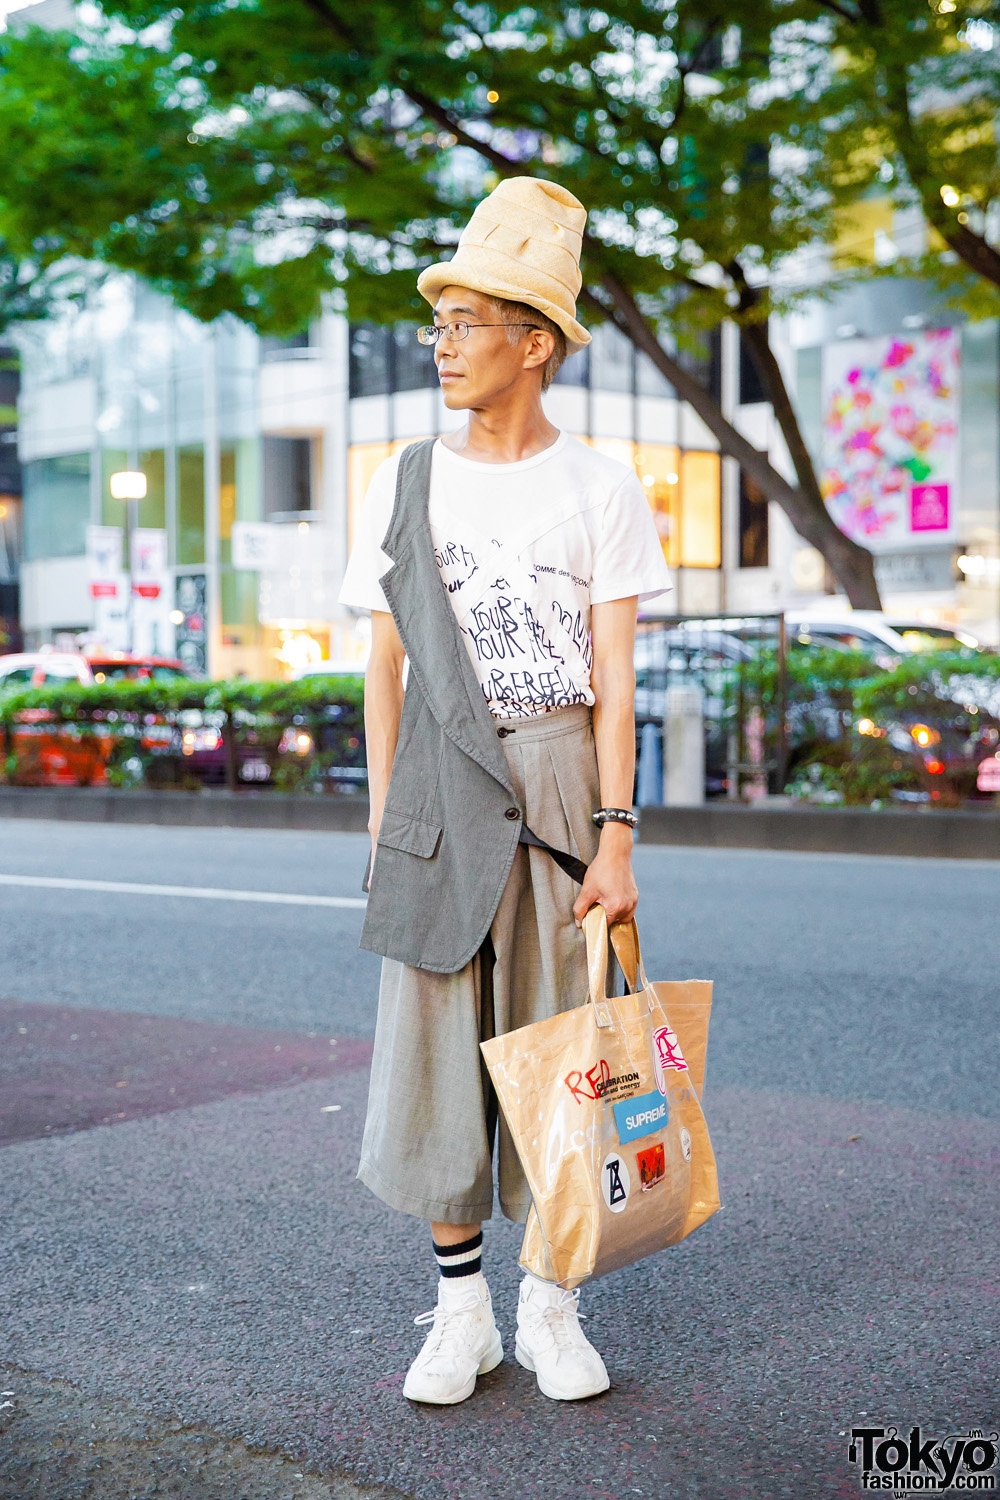 Comme des Garcons Harajuku Street Style w/ Tall Tan Hat, White Graphic Tee, Wide-Leg Pants & White Sneakers